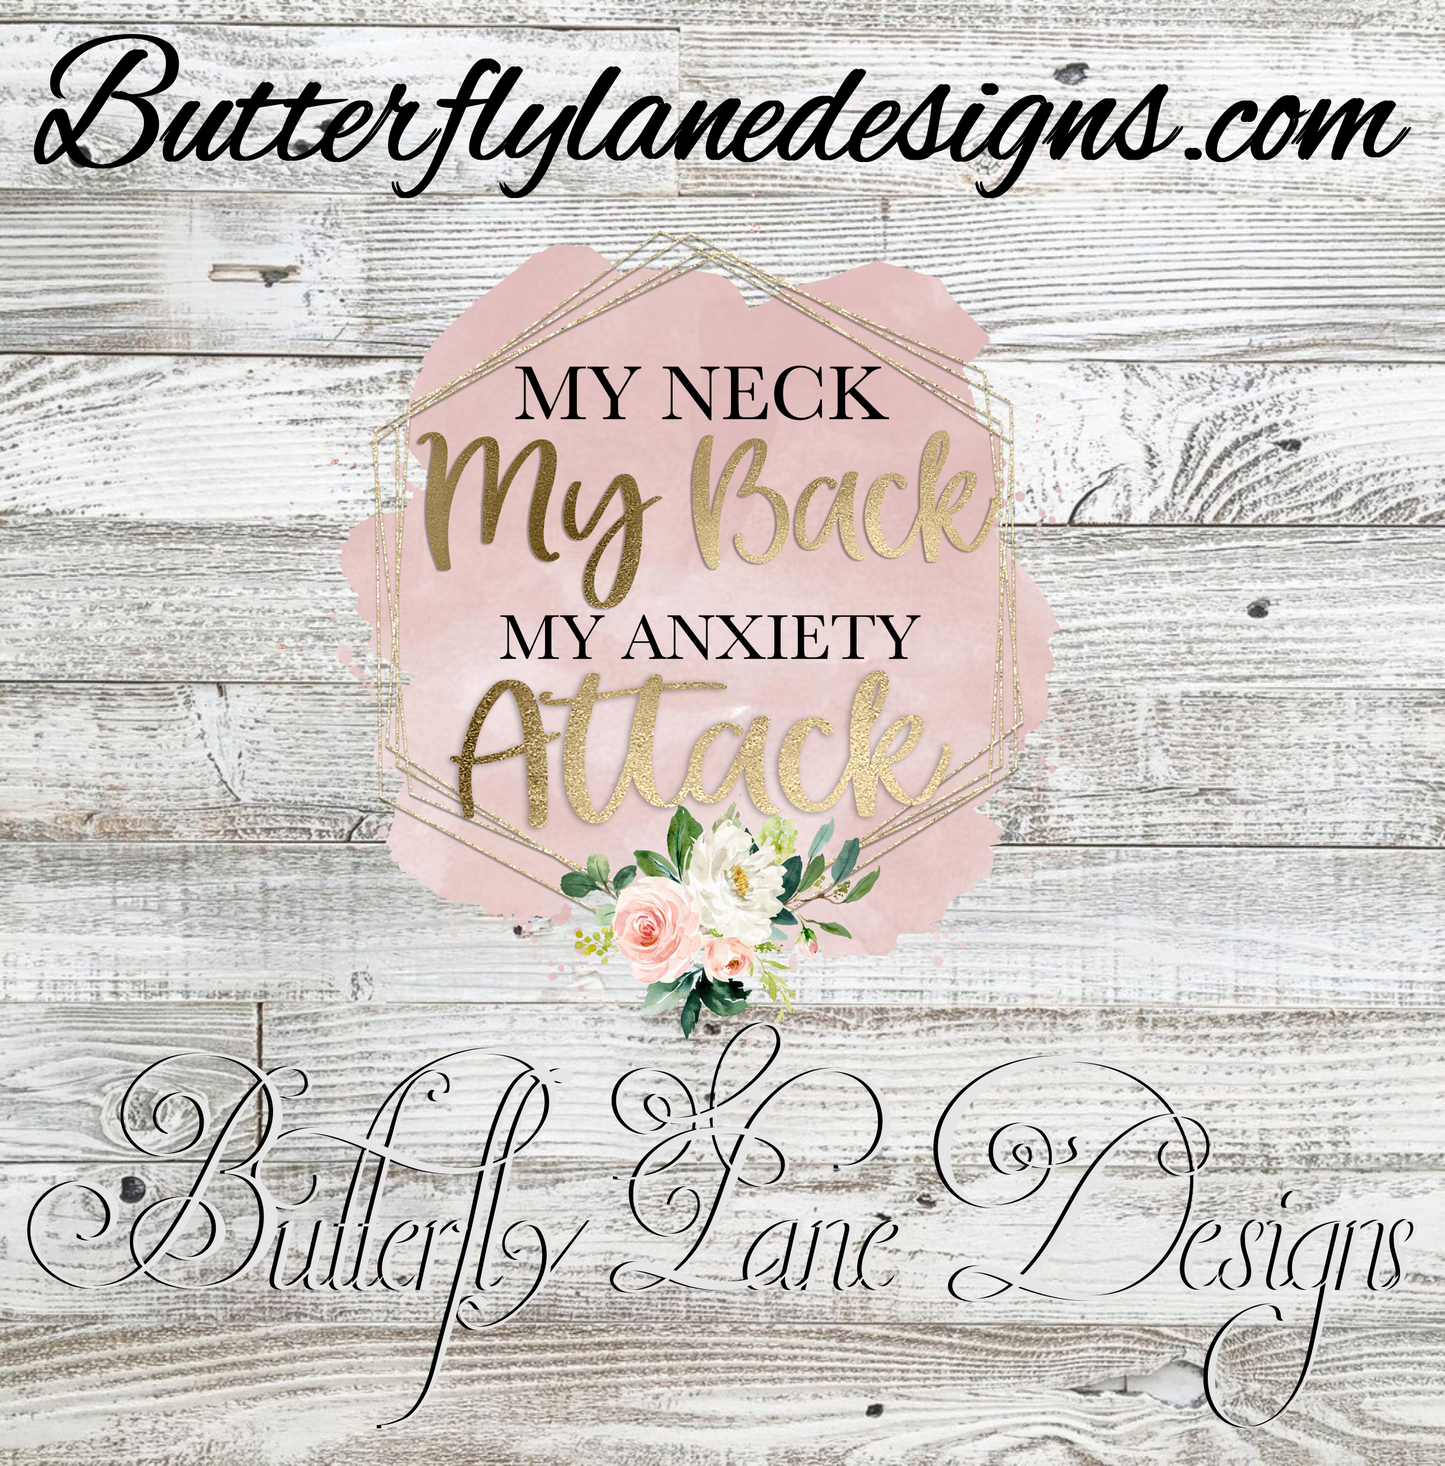 My neck-my back- my anxiety attack :: Clear Cast Decal